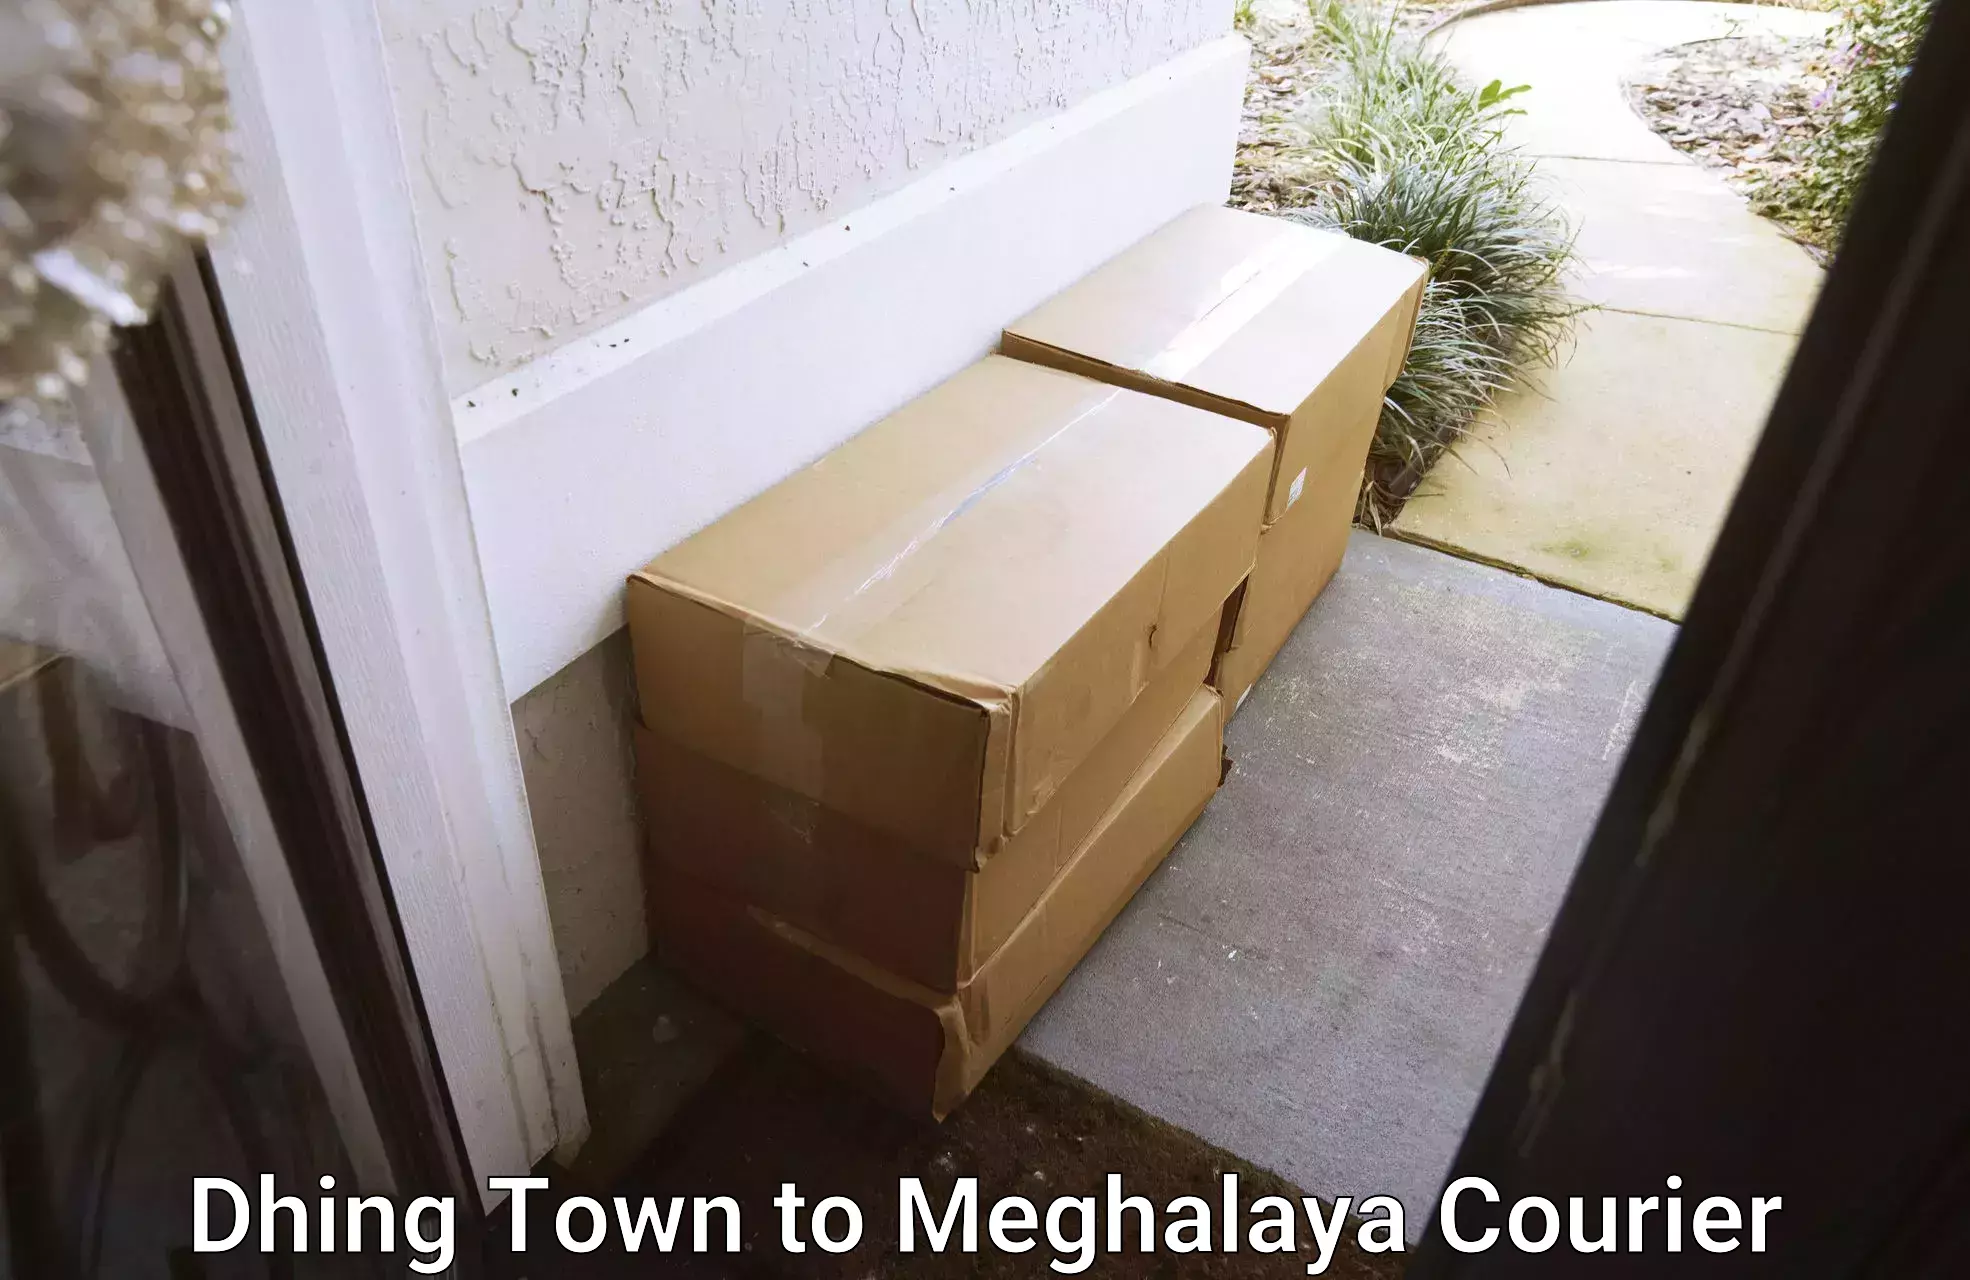 Efficient order fulfillment Dhing Town to Meghalaya